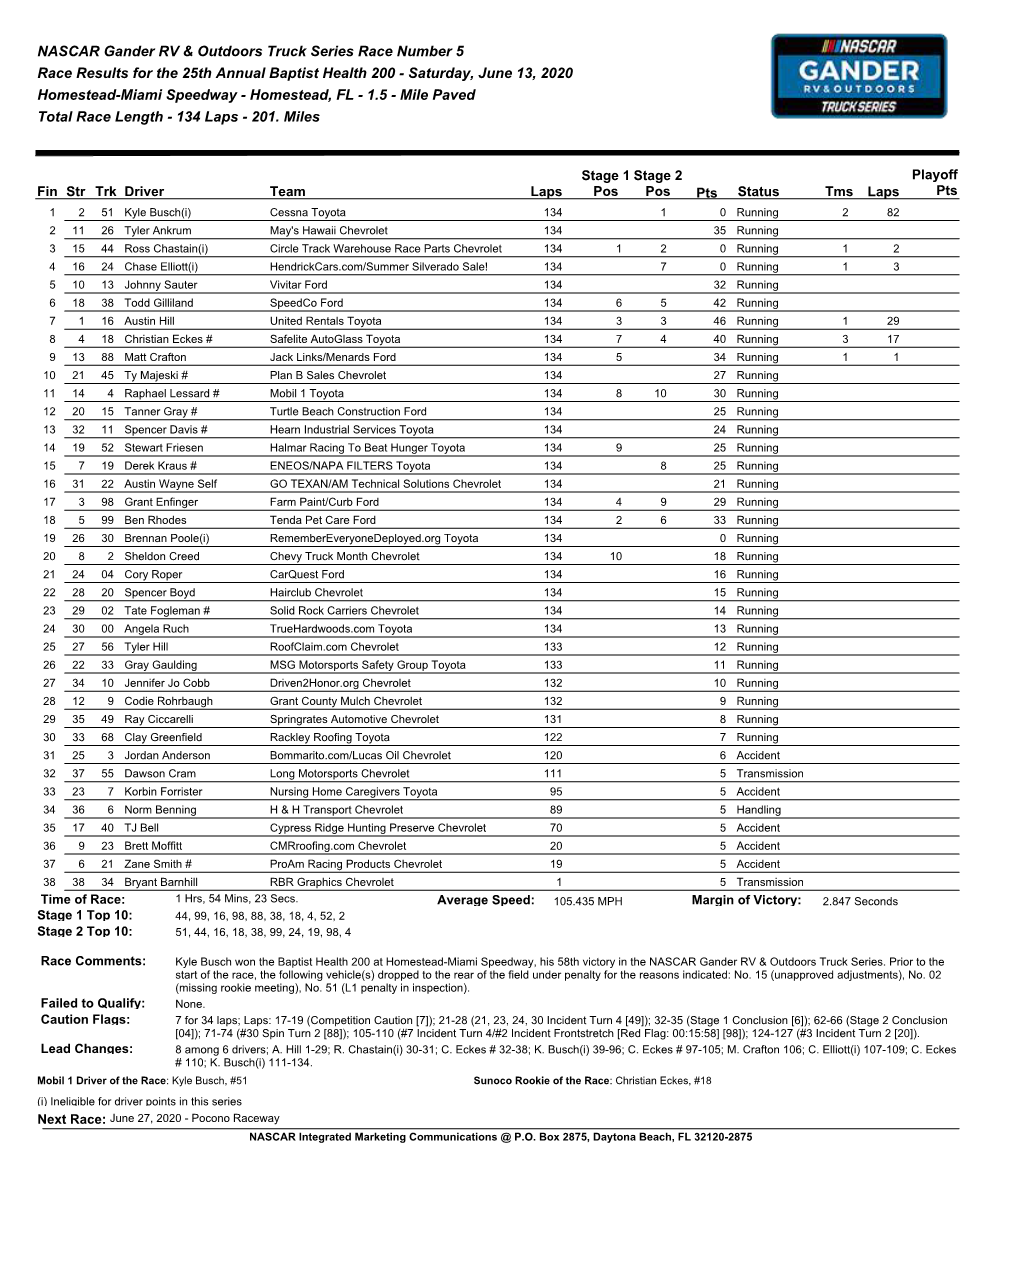 NASCAR Gander RV & Outdoors Truck Series Race Number 5 Race Results for the 25Th Annual Baptist Health